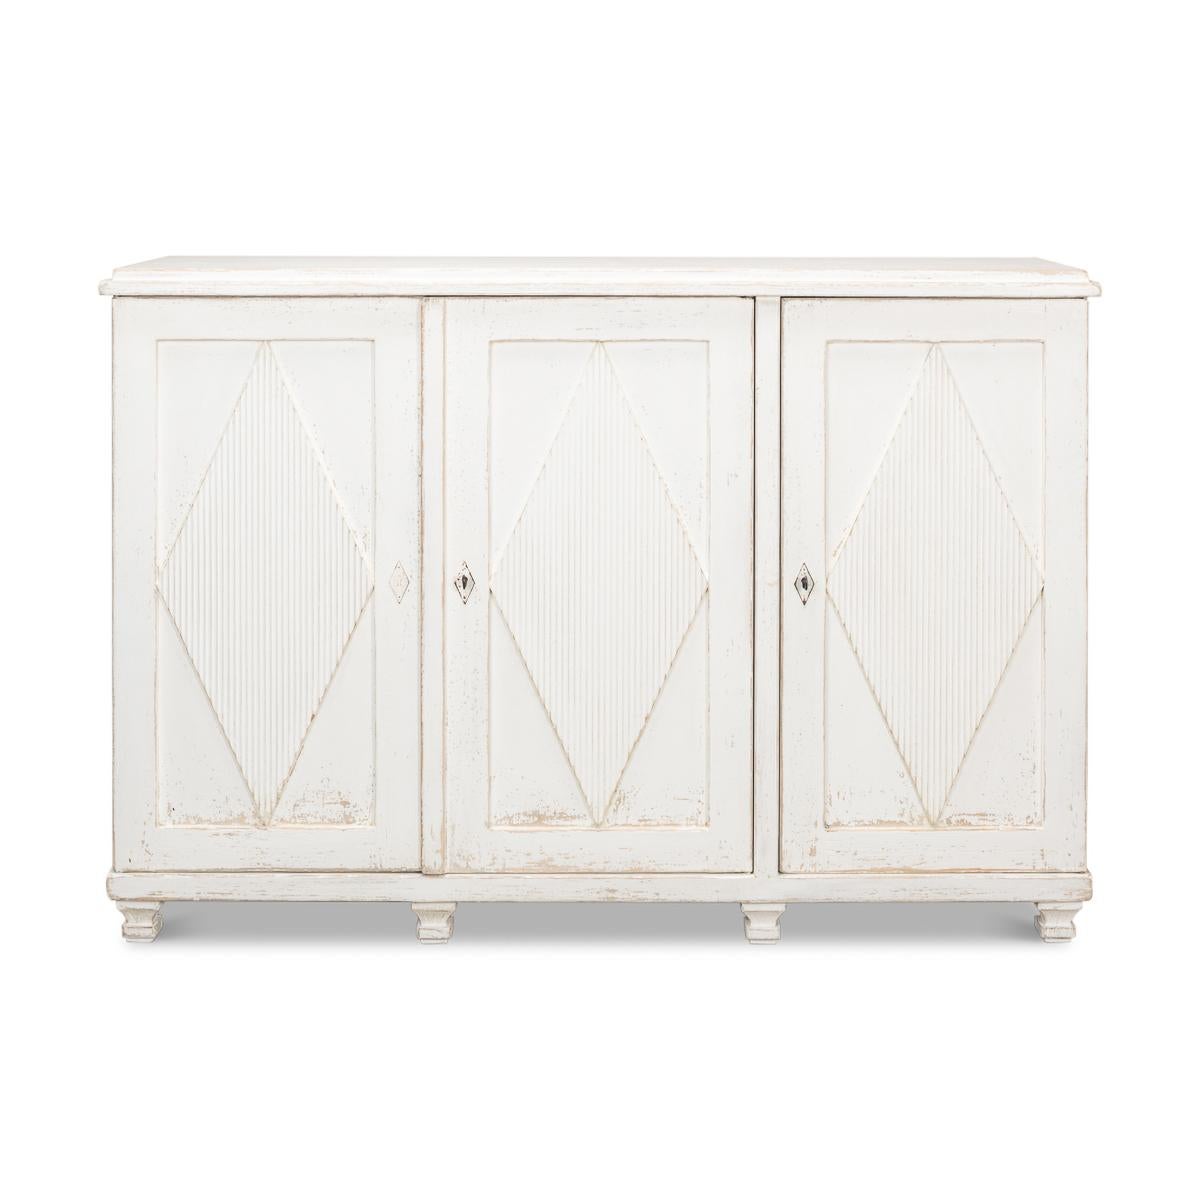 French Directoire Style credenza in an antiqued white distressed painted finish, with diamond reeded patterns, a fitted interior with shelves and three drawers, diamond escutcheons and raised short tapered legs.

Dimensions: 66